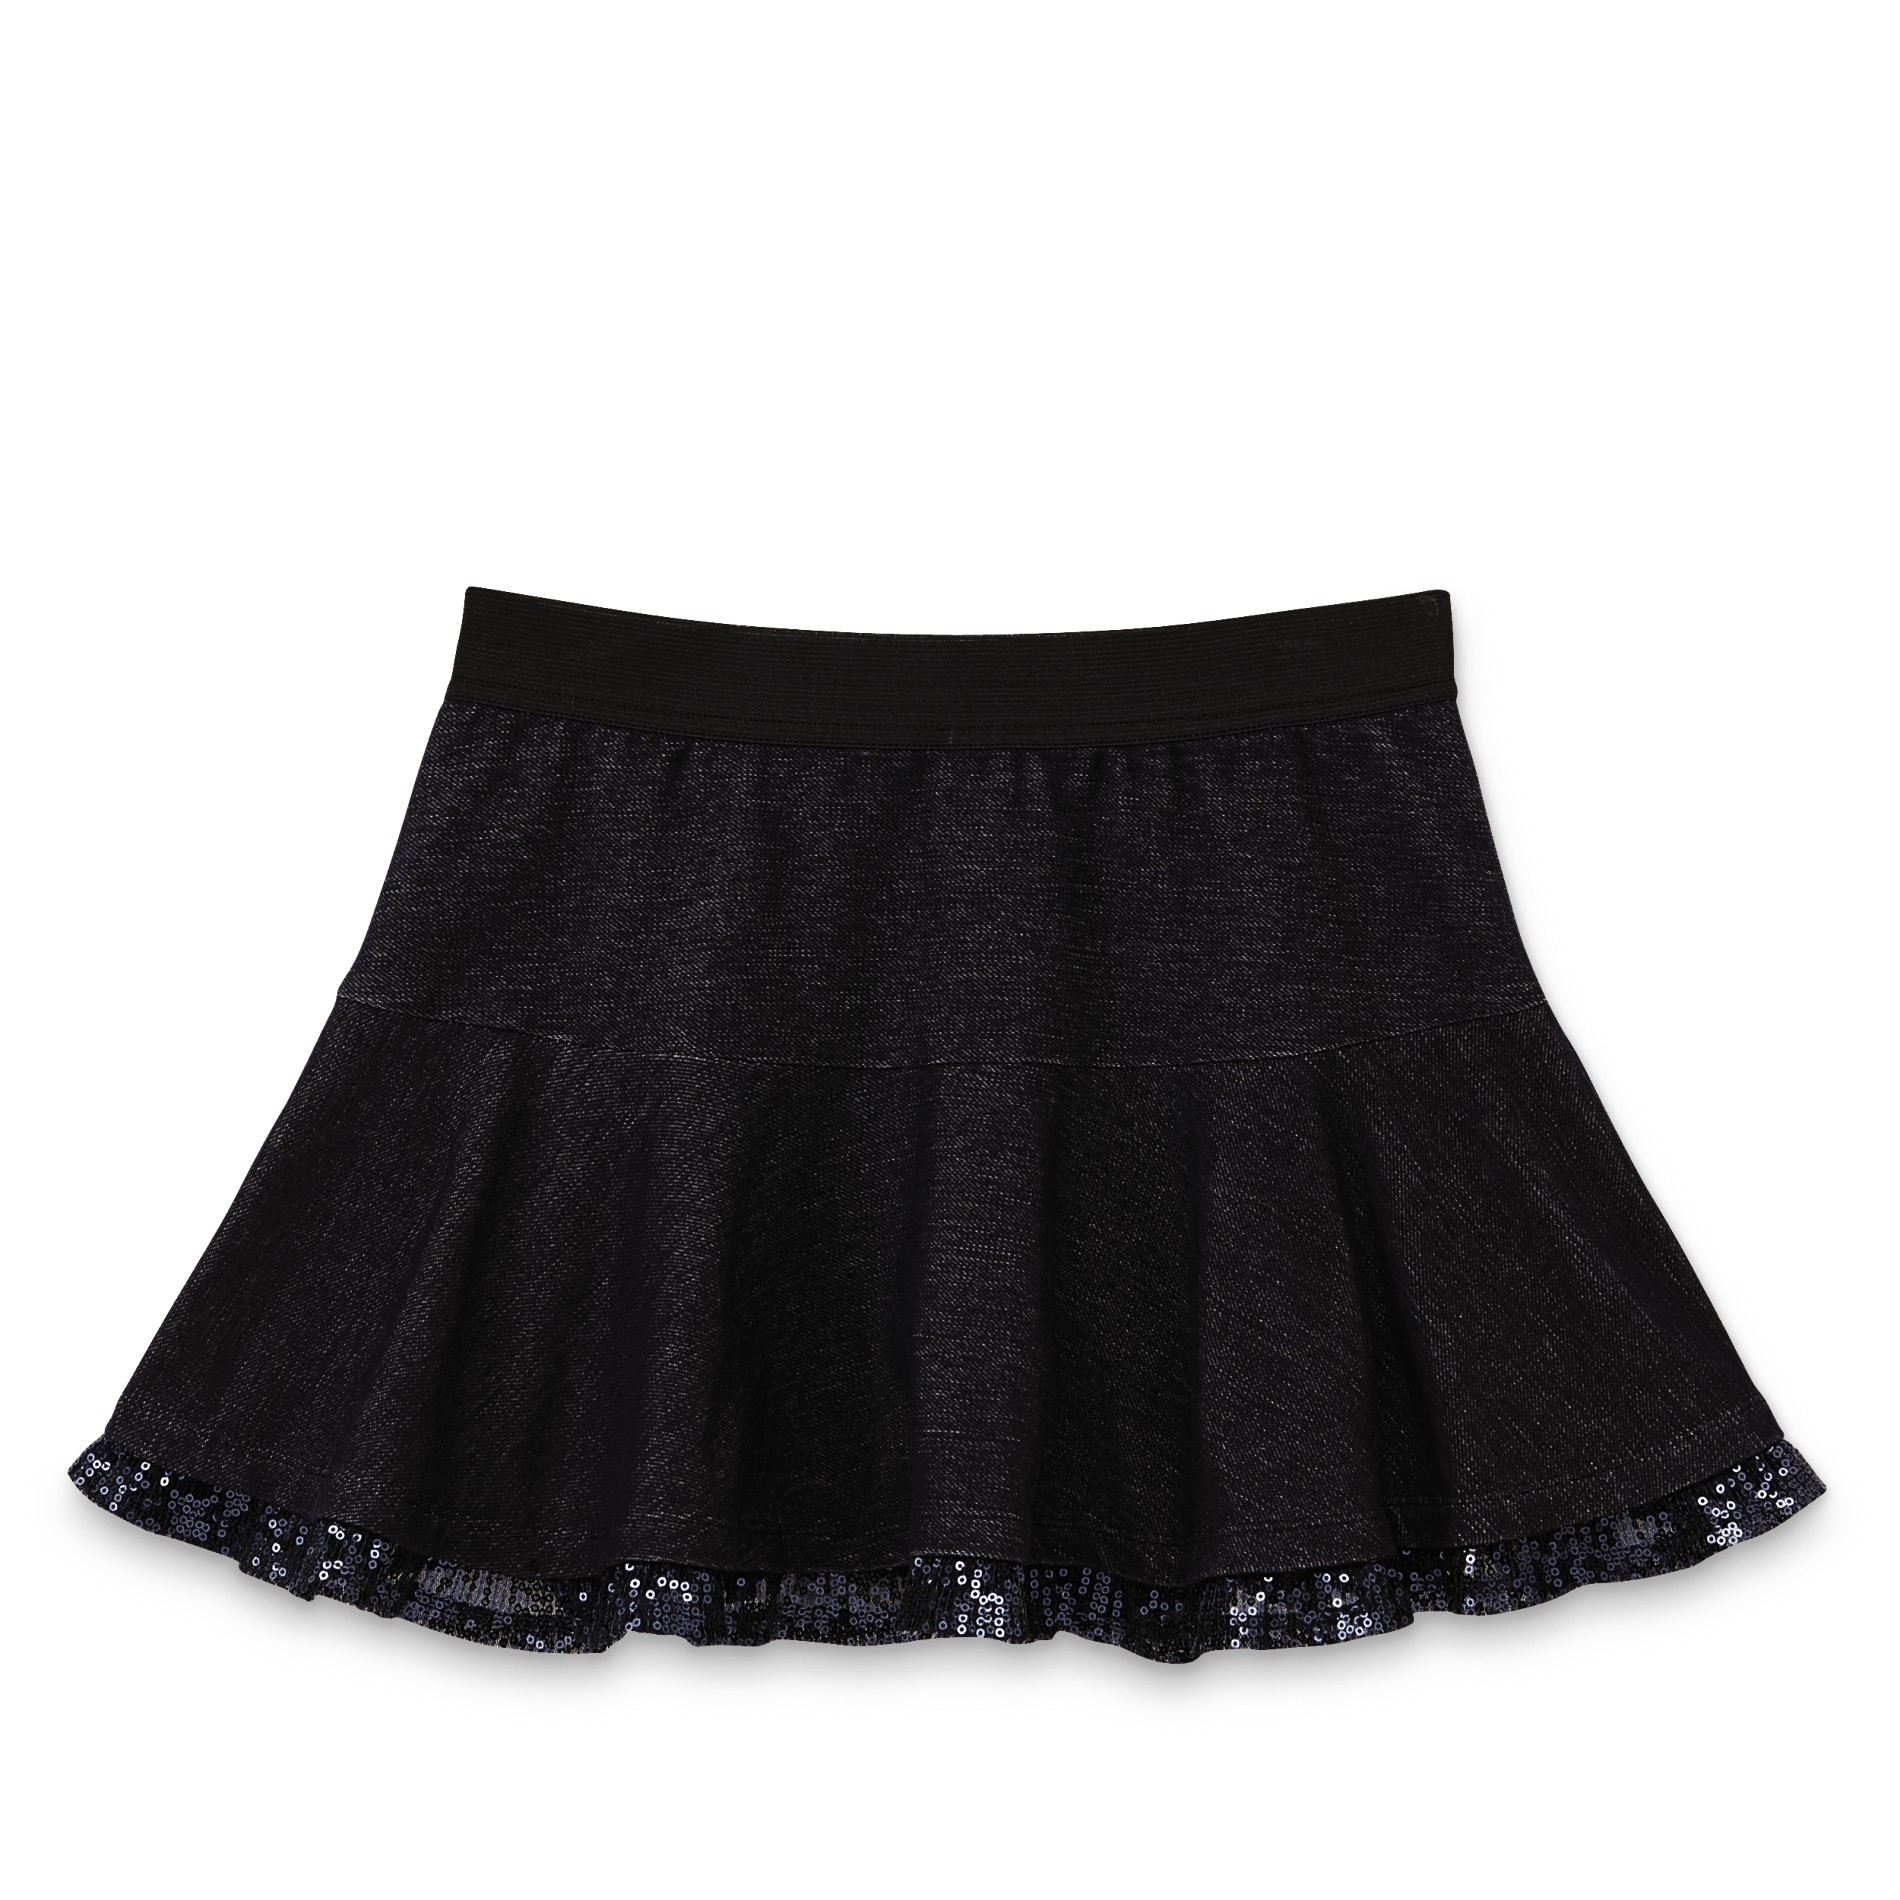 Canyon River Blues Girl's Ruffled Scooter Skirt